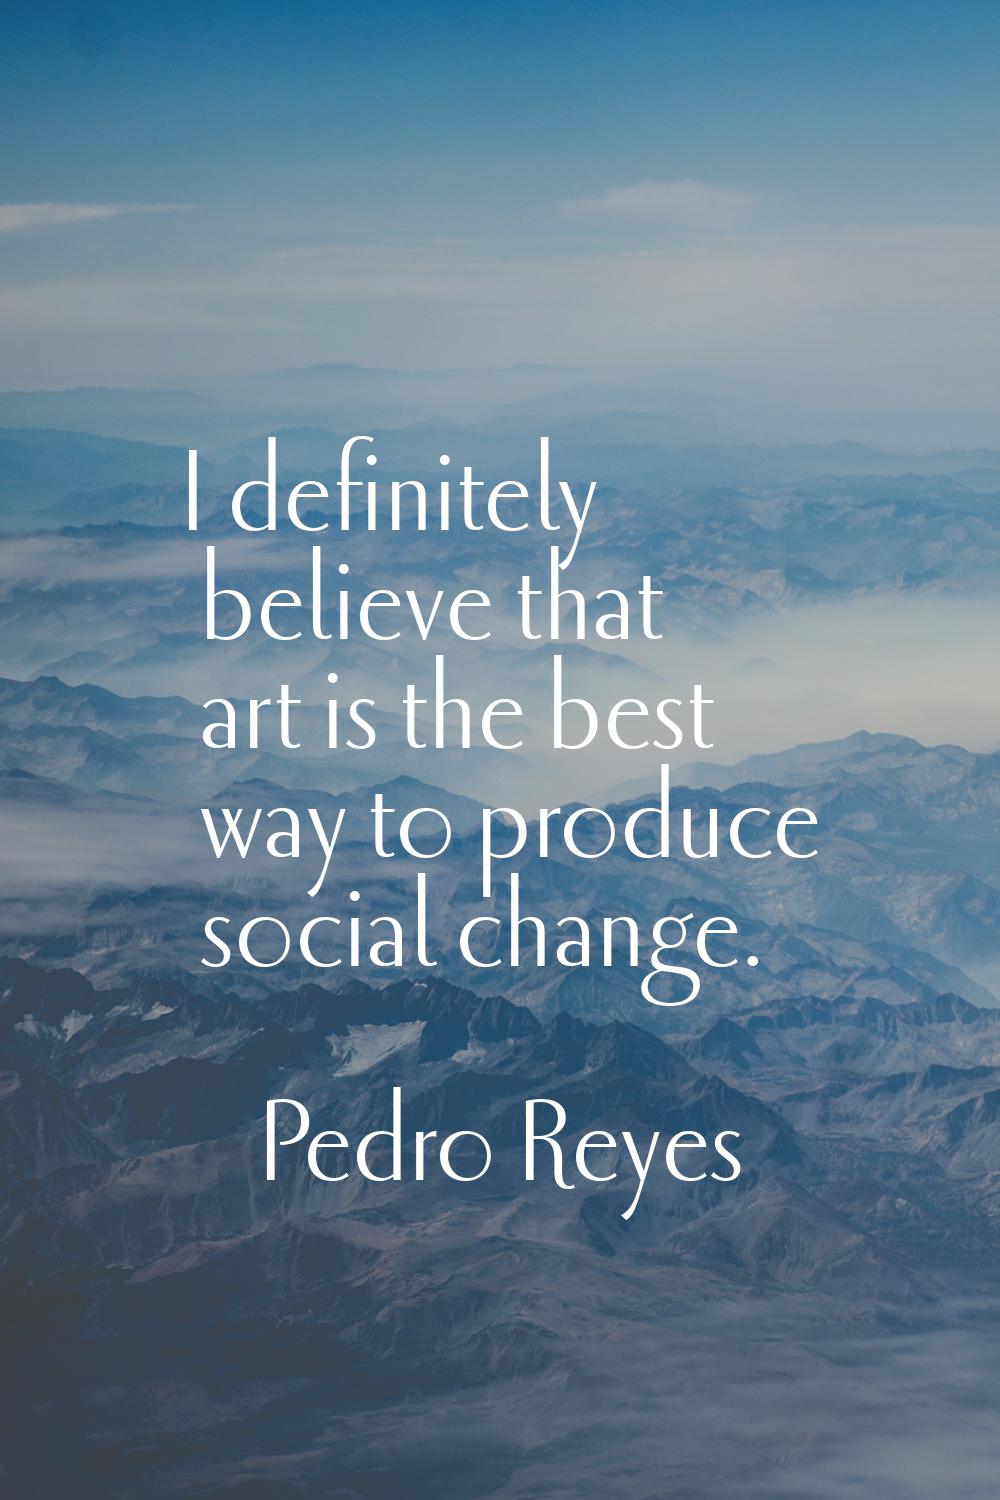 I definitely believe that art is the best way to produce social change.